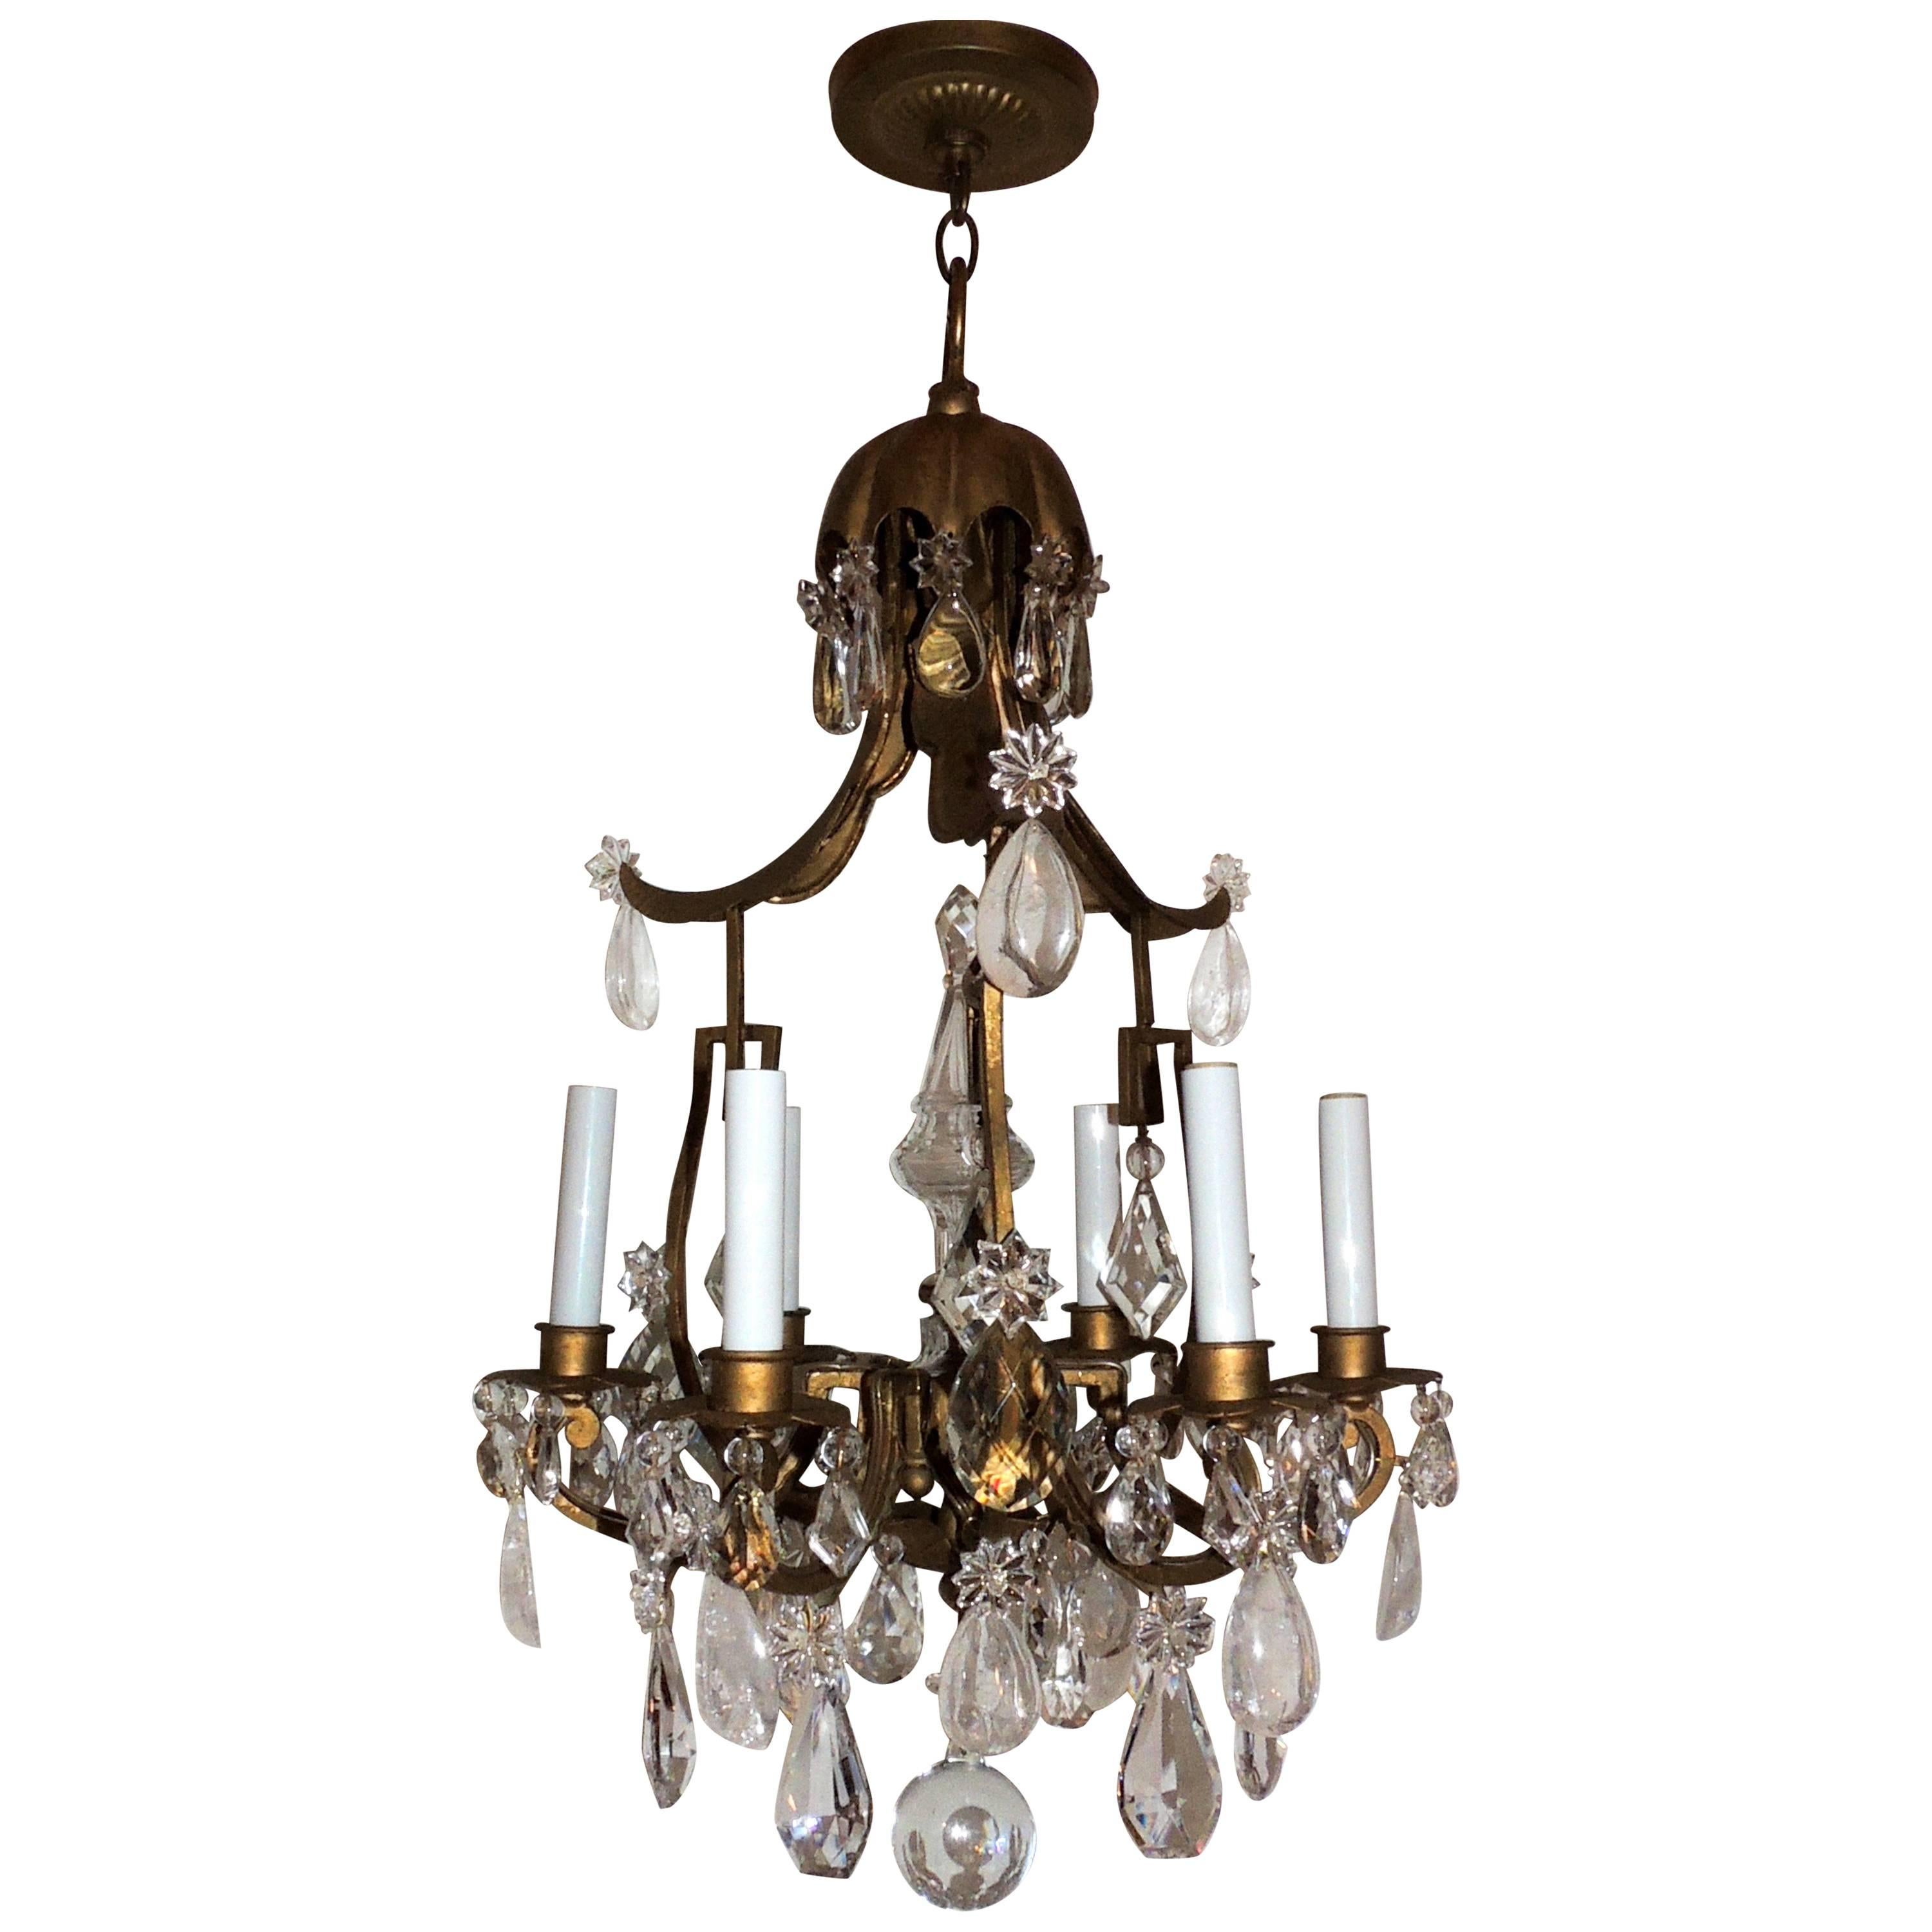 Wonderful French Pagoda Gilt Rock Crystal Bagues Chandelier Six-Light Fixture For Sale